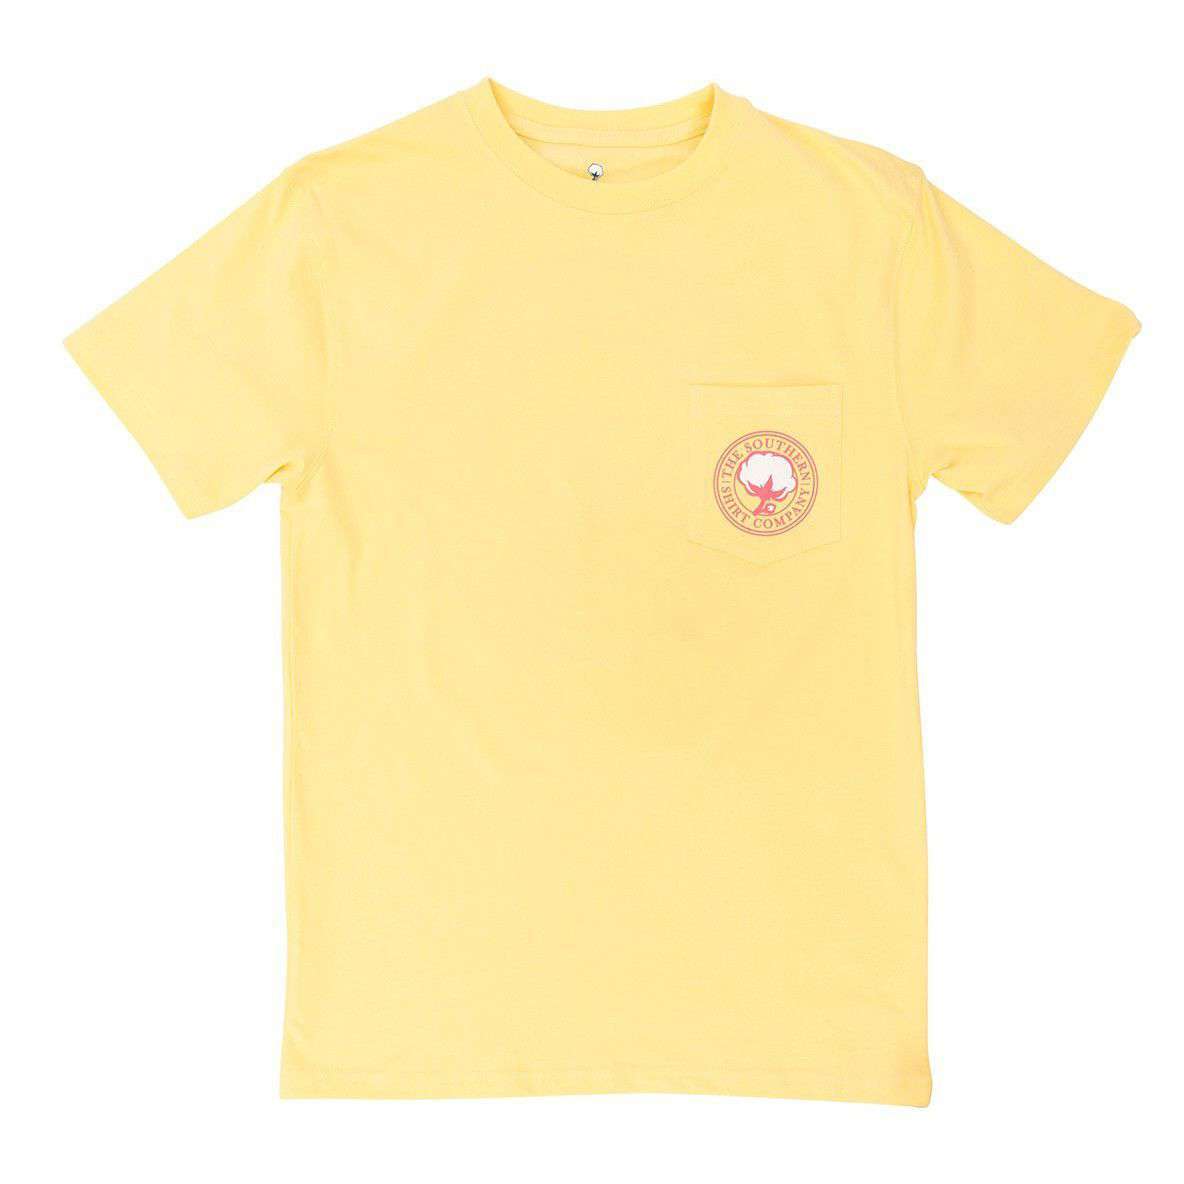 Pineapple Logo Tee Shirt in Sunshine by The Southern Shirt Co. - Country Club Prep